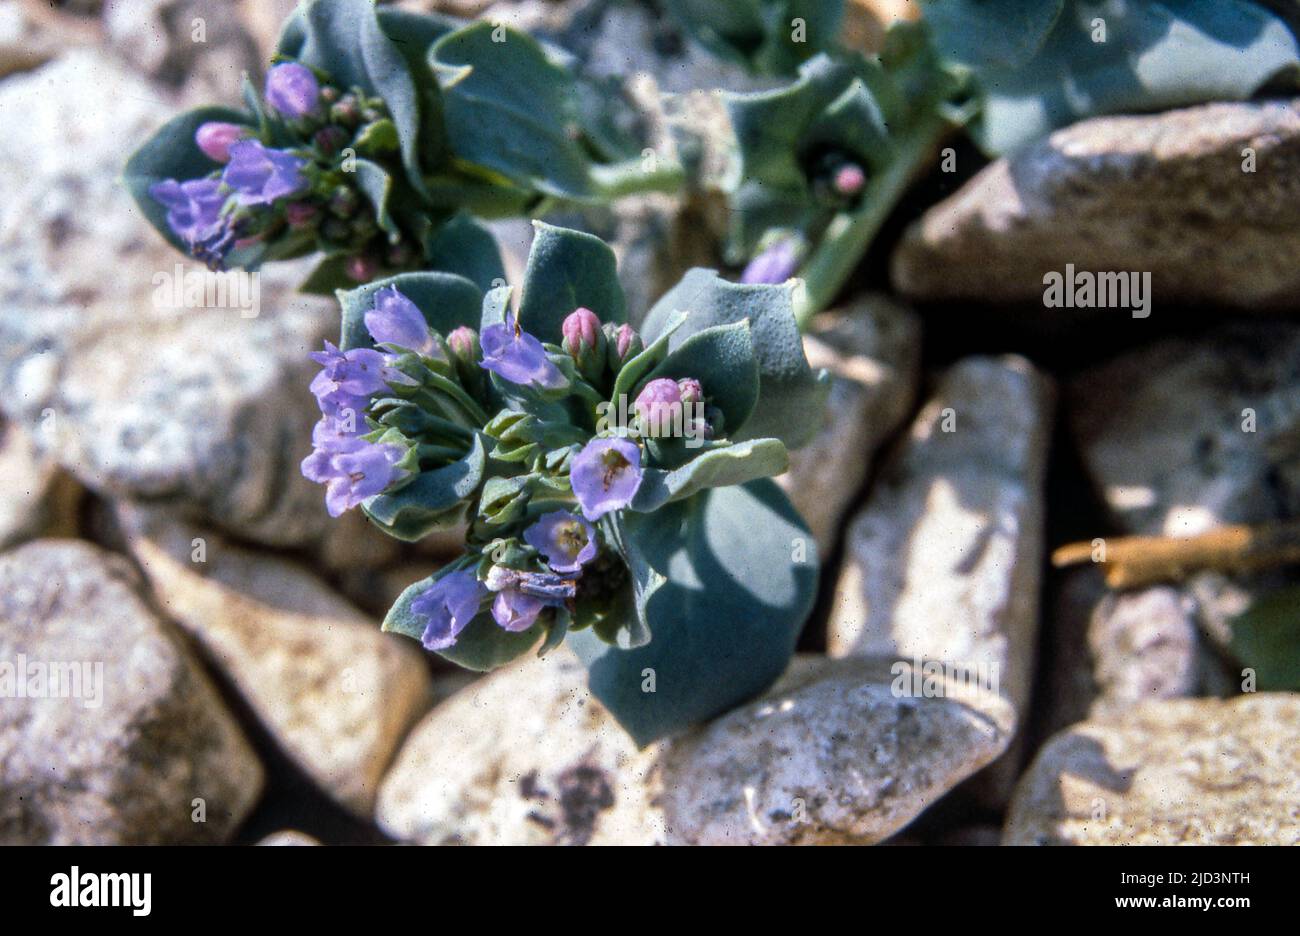 Oyster plant (Mertensia maritima) from Hidra, south-western Norway in July 1981. Stock Photo